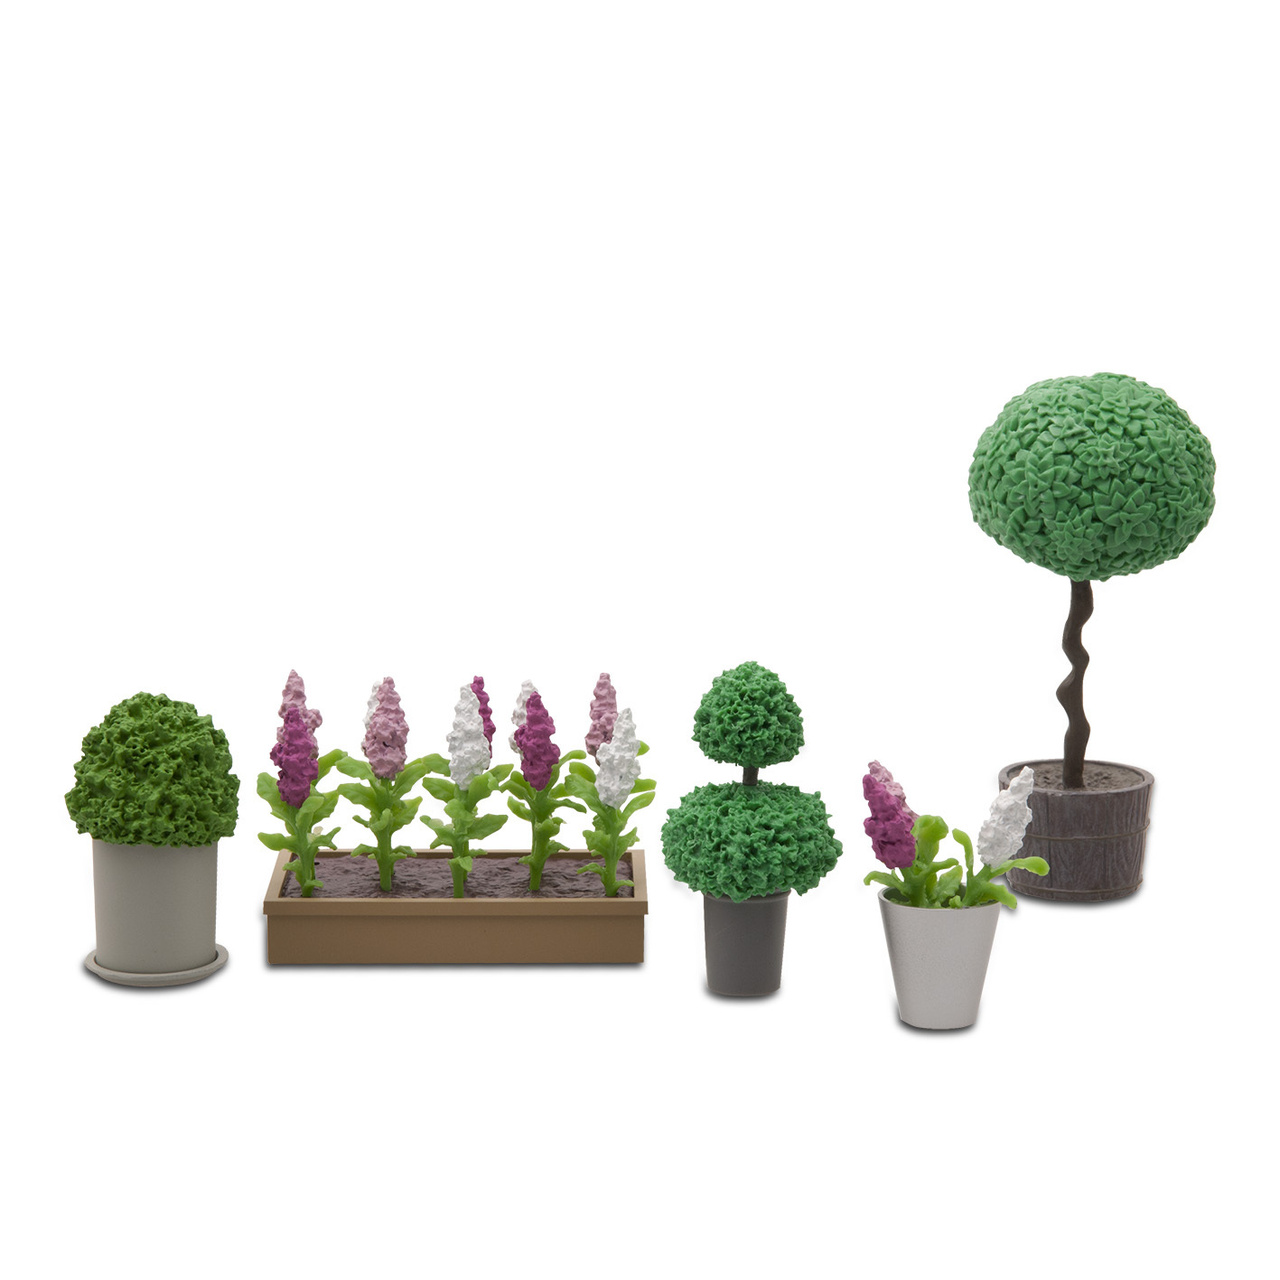 Doll house furniture & doll house accessories lundby dollhouse accessories plants & flowers